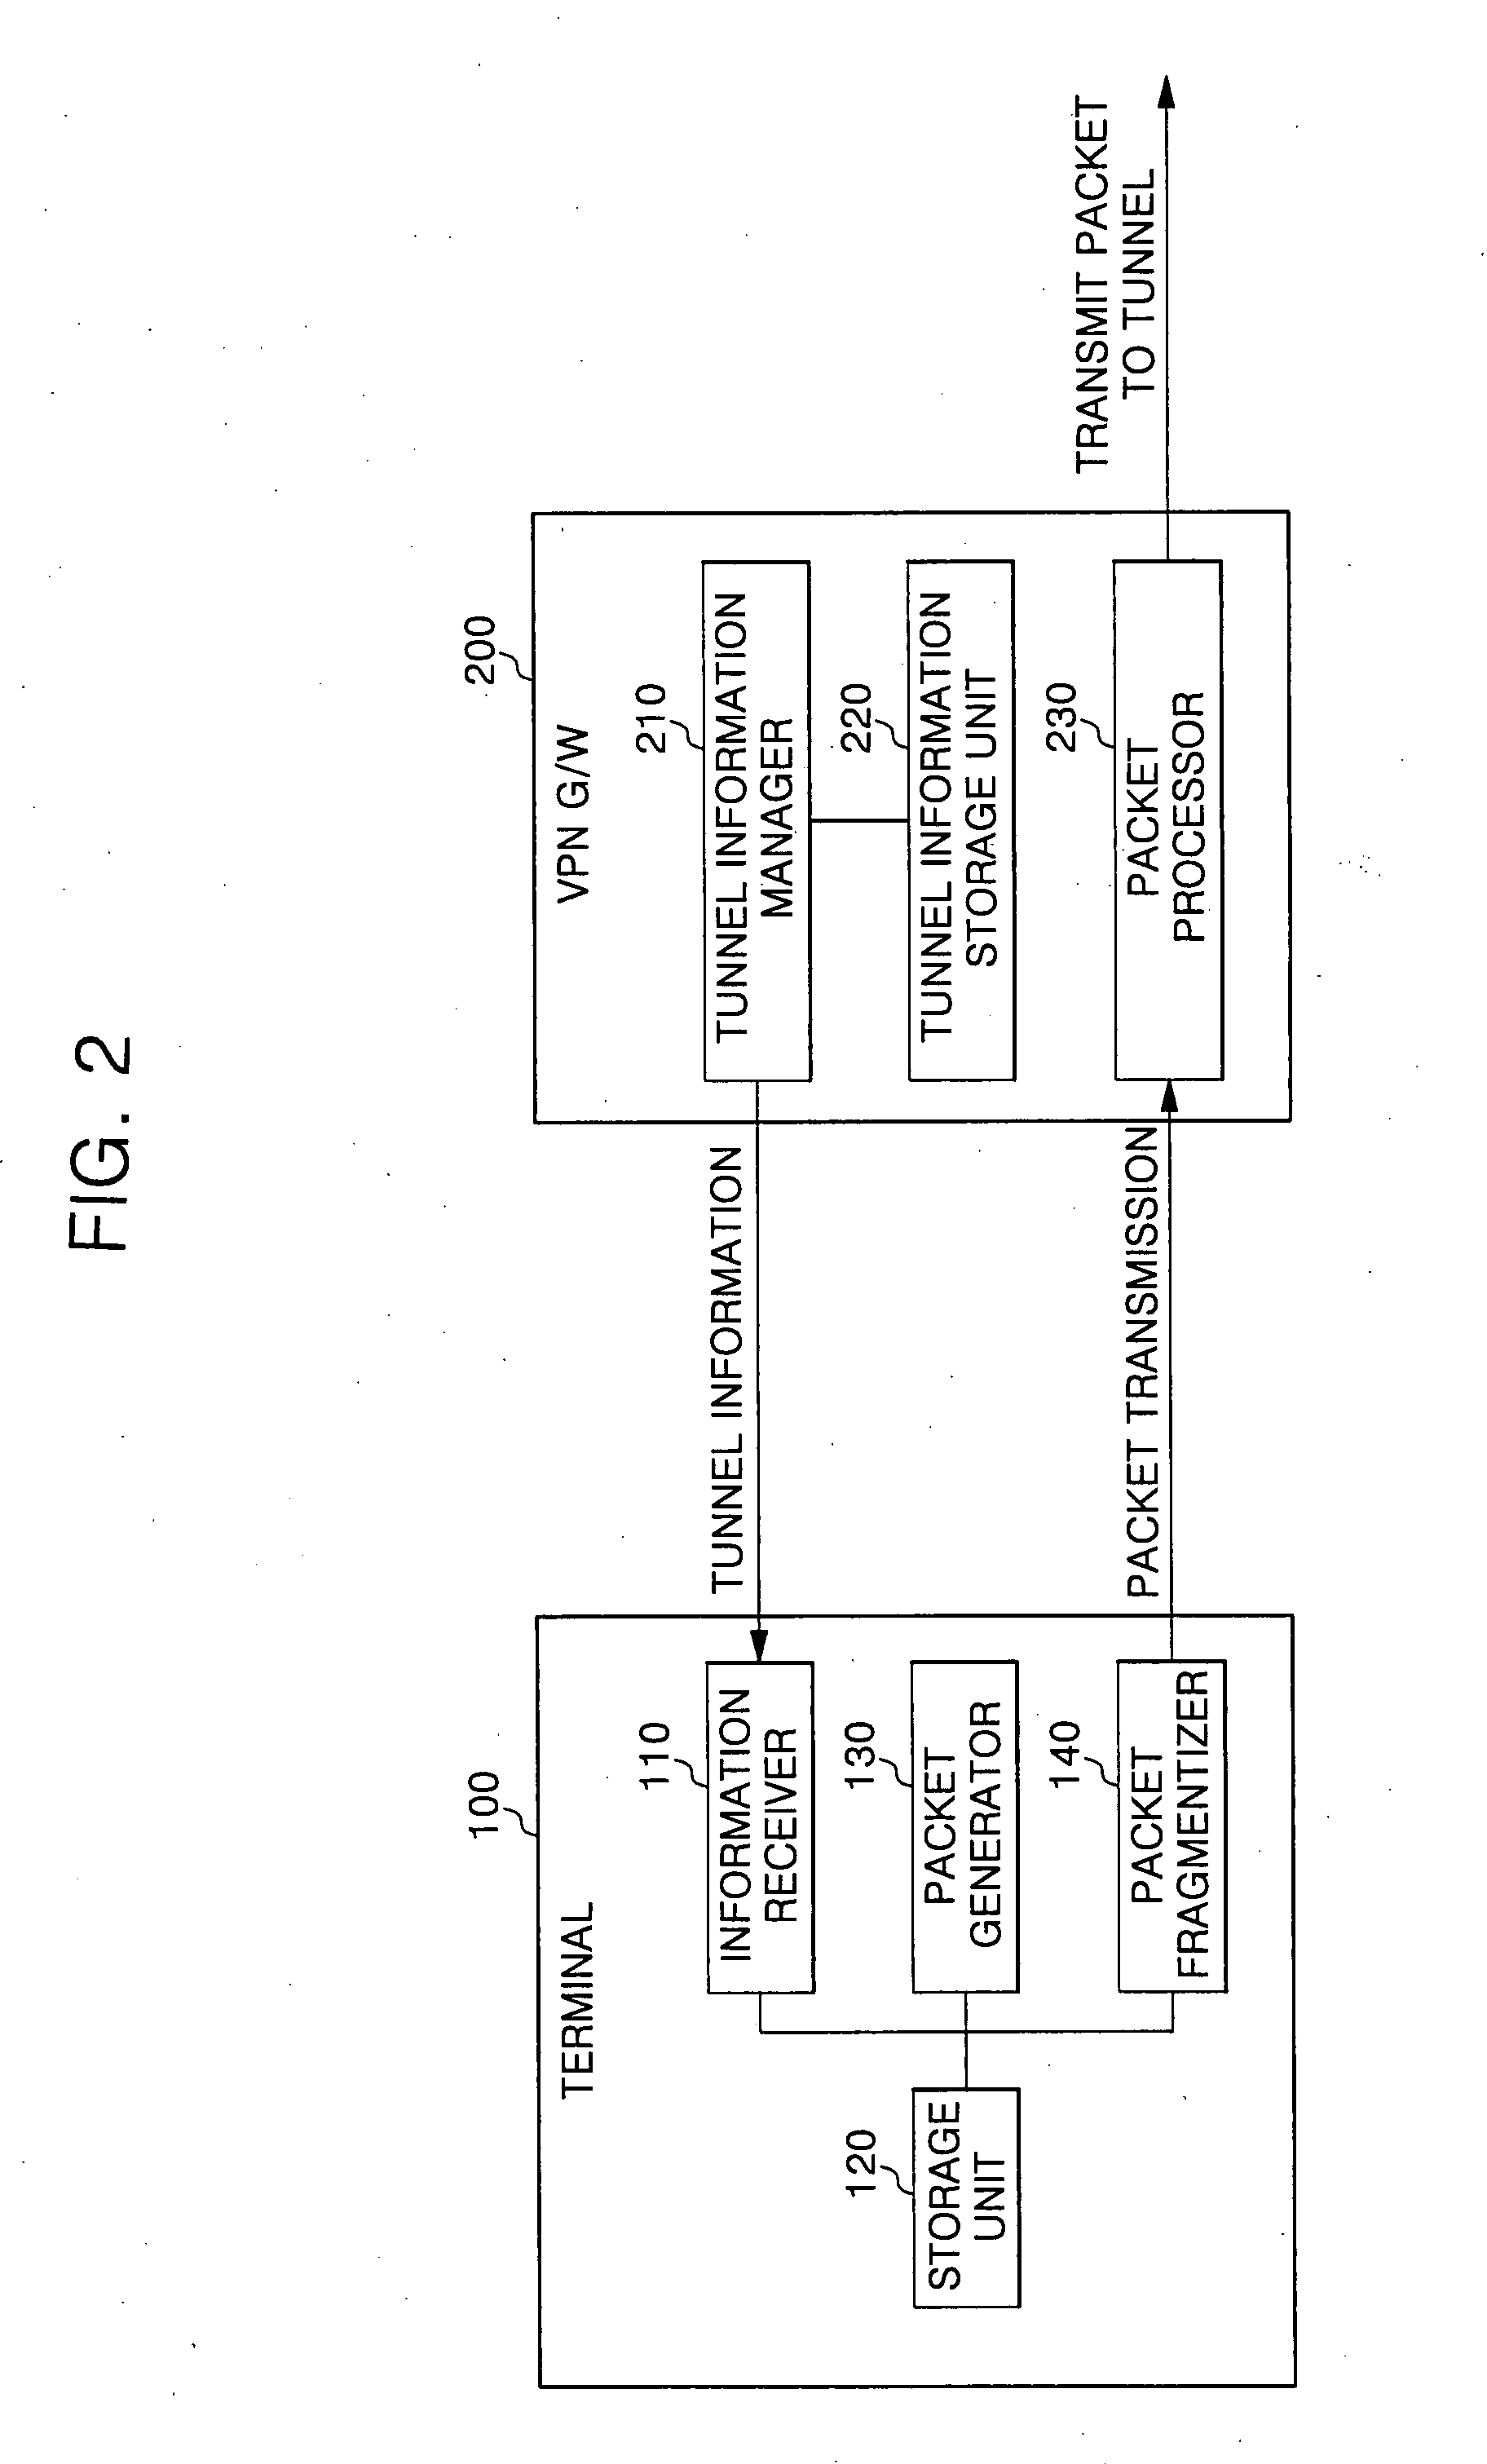 Apparatus and method for processing packets in secure communication system